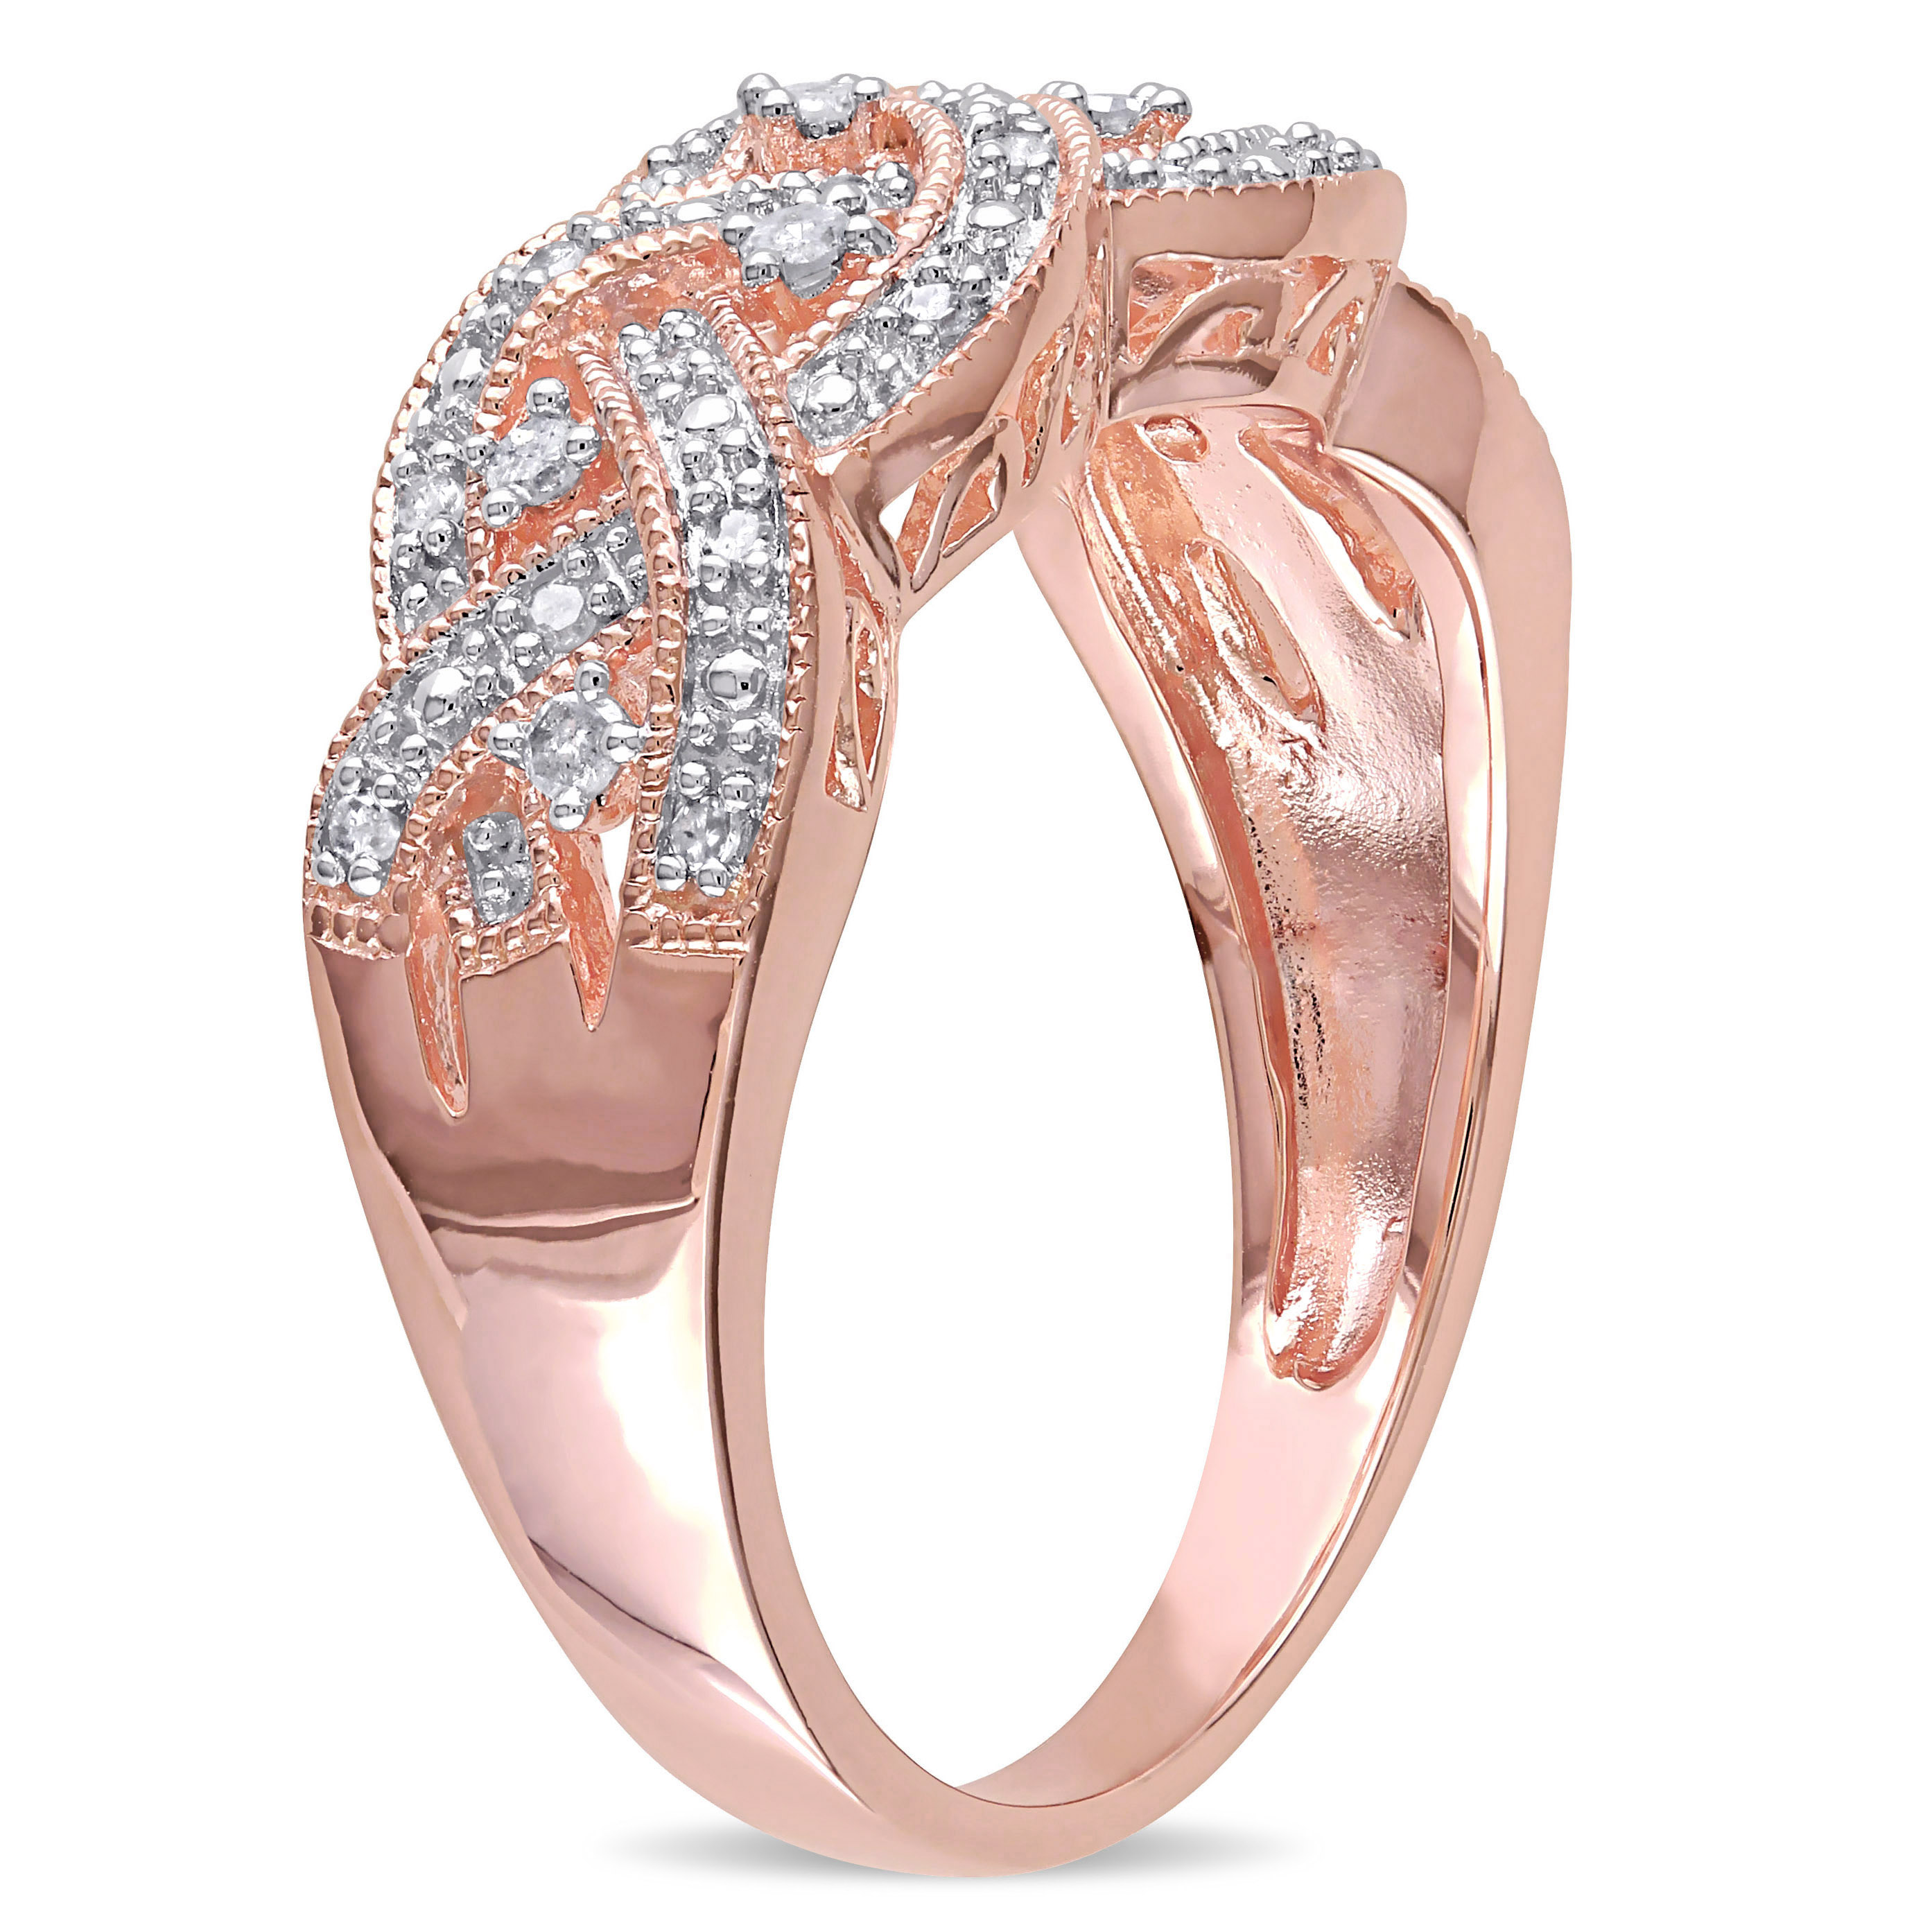 1/8 CT TW Diamond Braided Ring in Pink Plated Sterling Silver